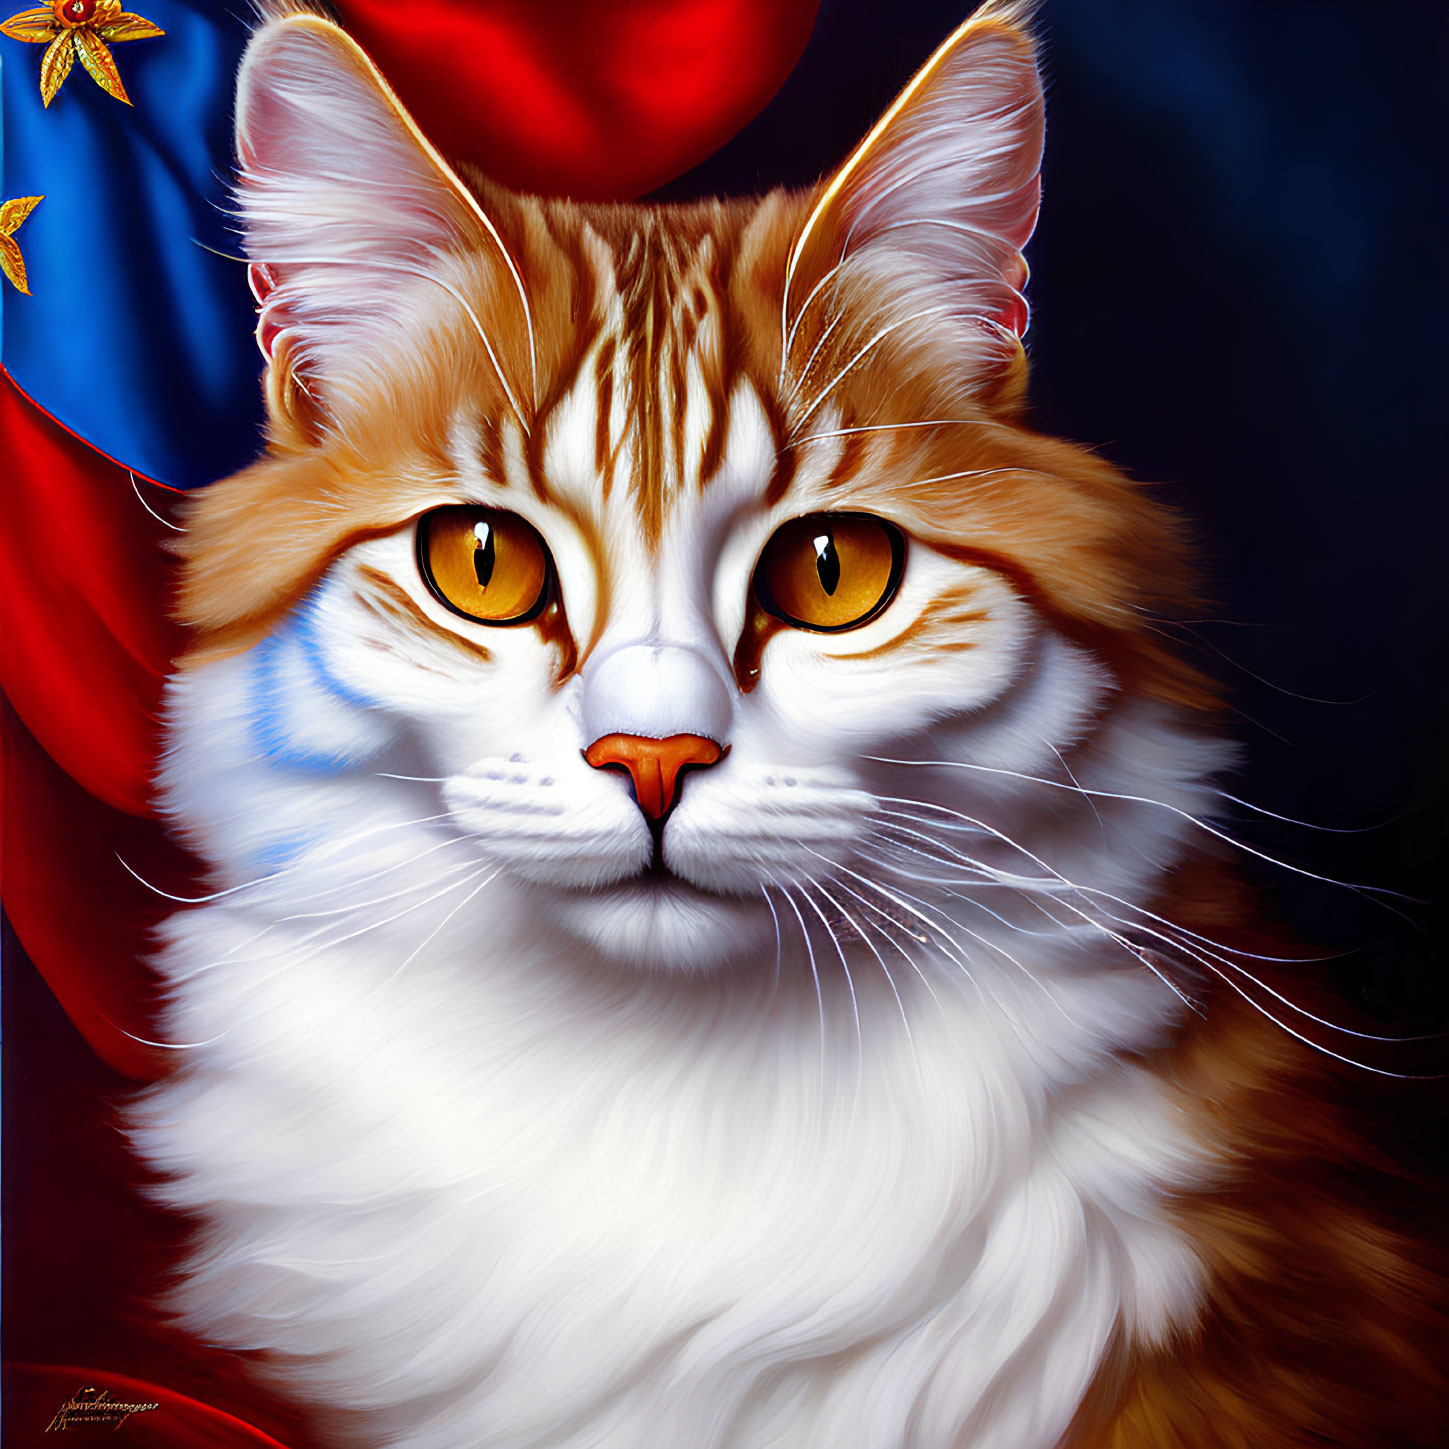 Detailed Illustration of Fluffy Cat with Amber Eyes on American Flag Background